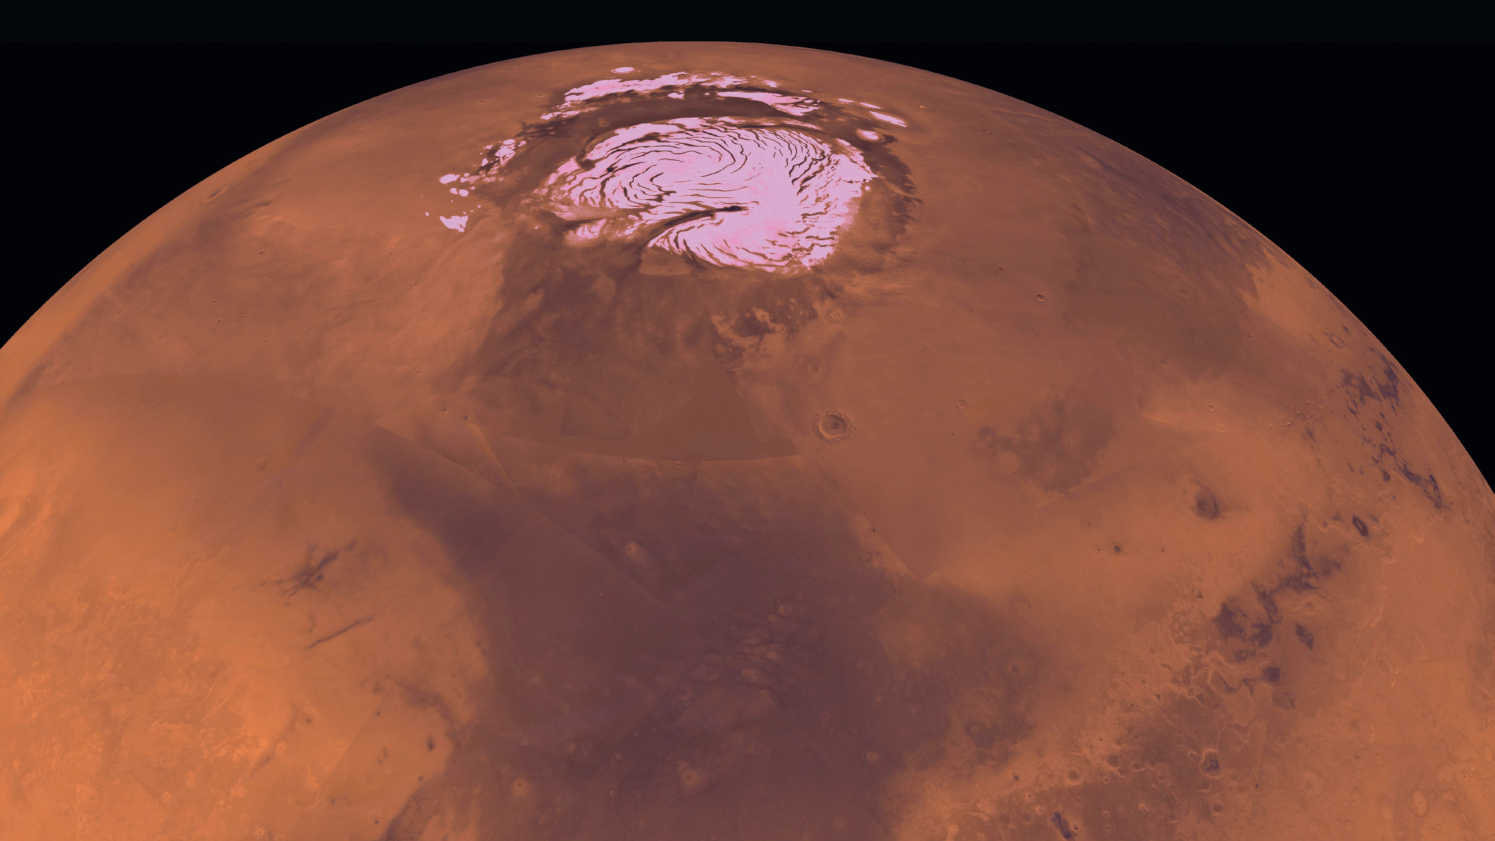 A view of the Red Planet